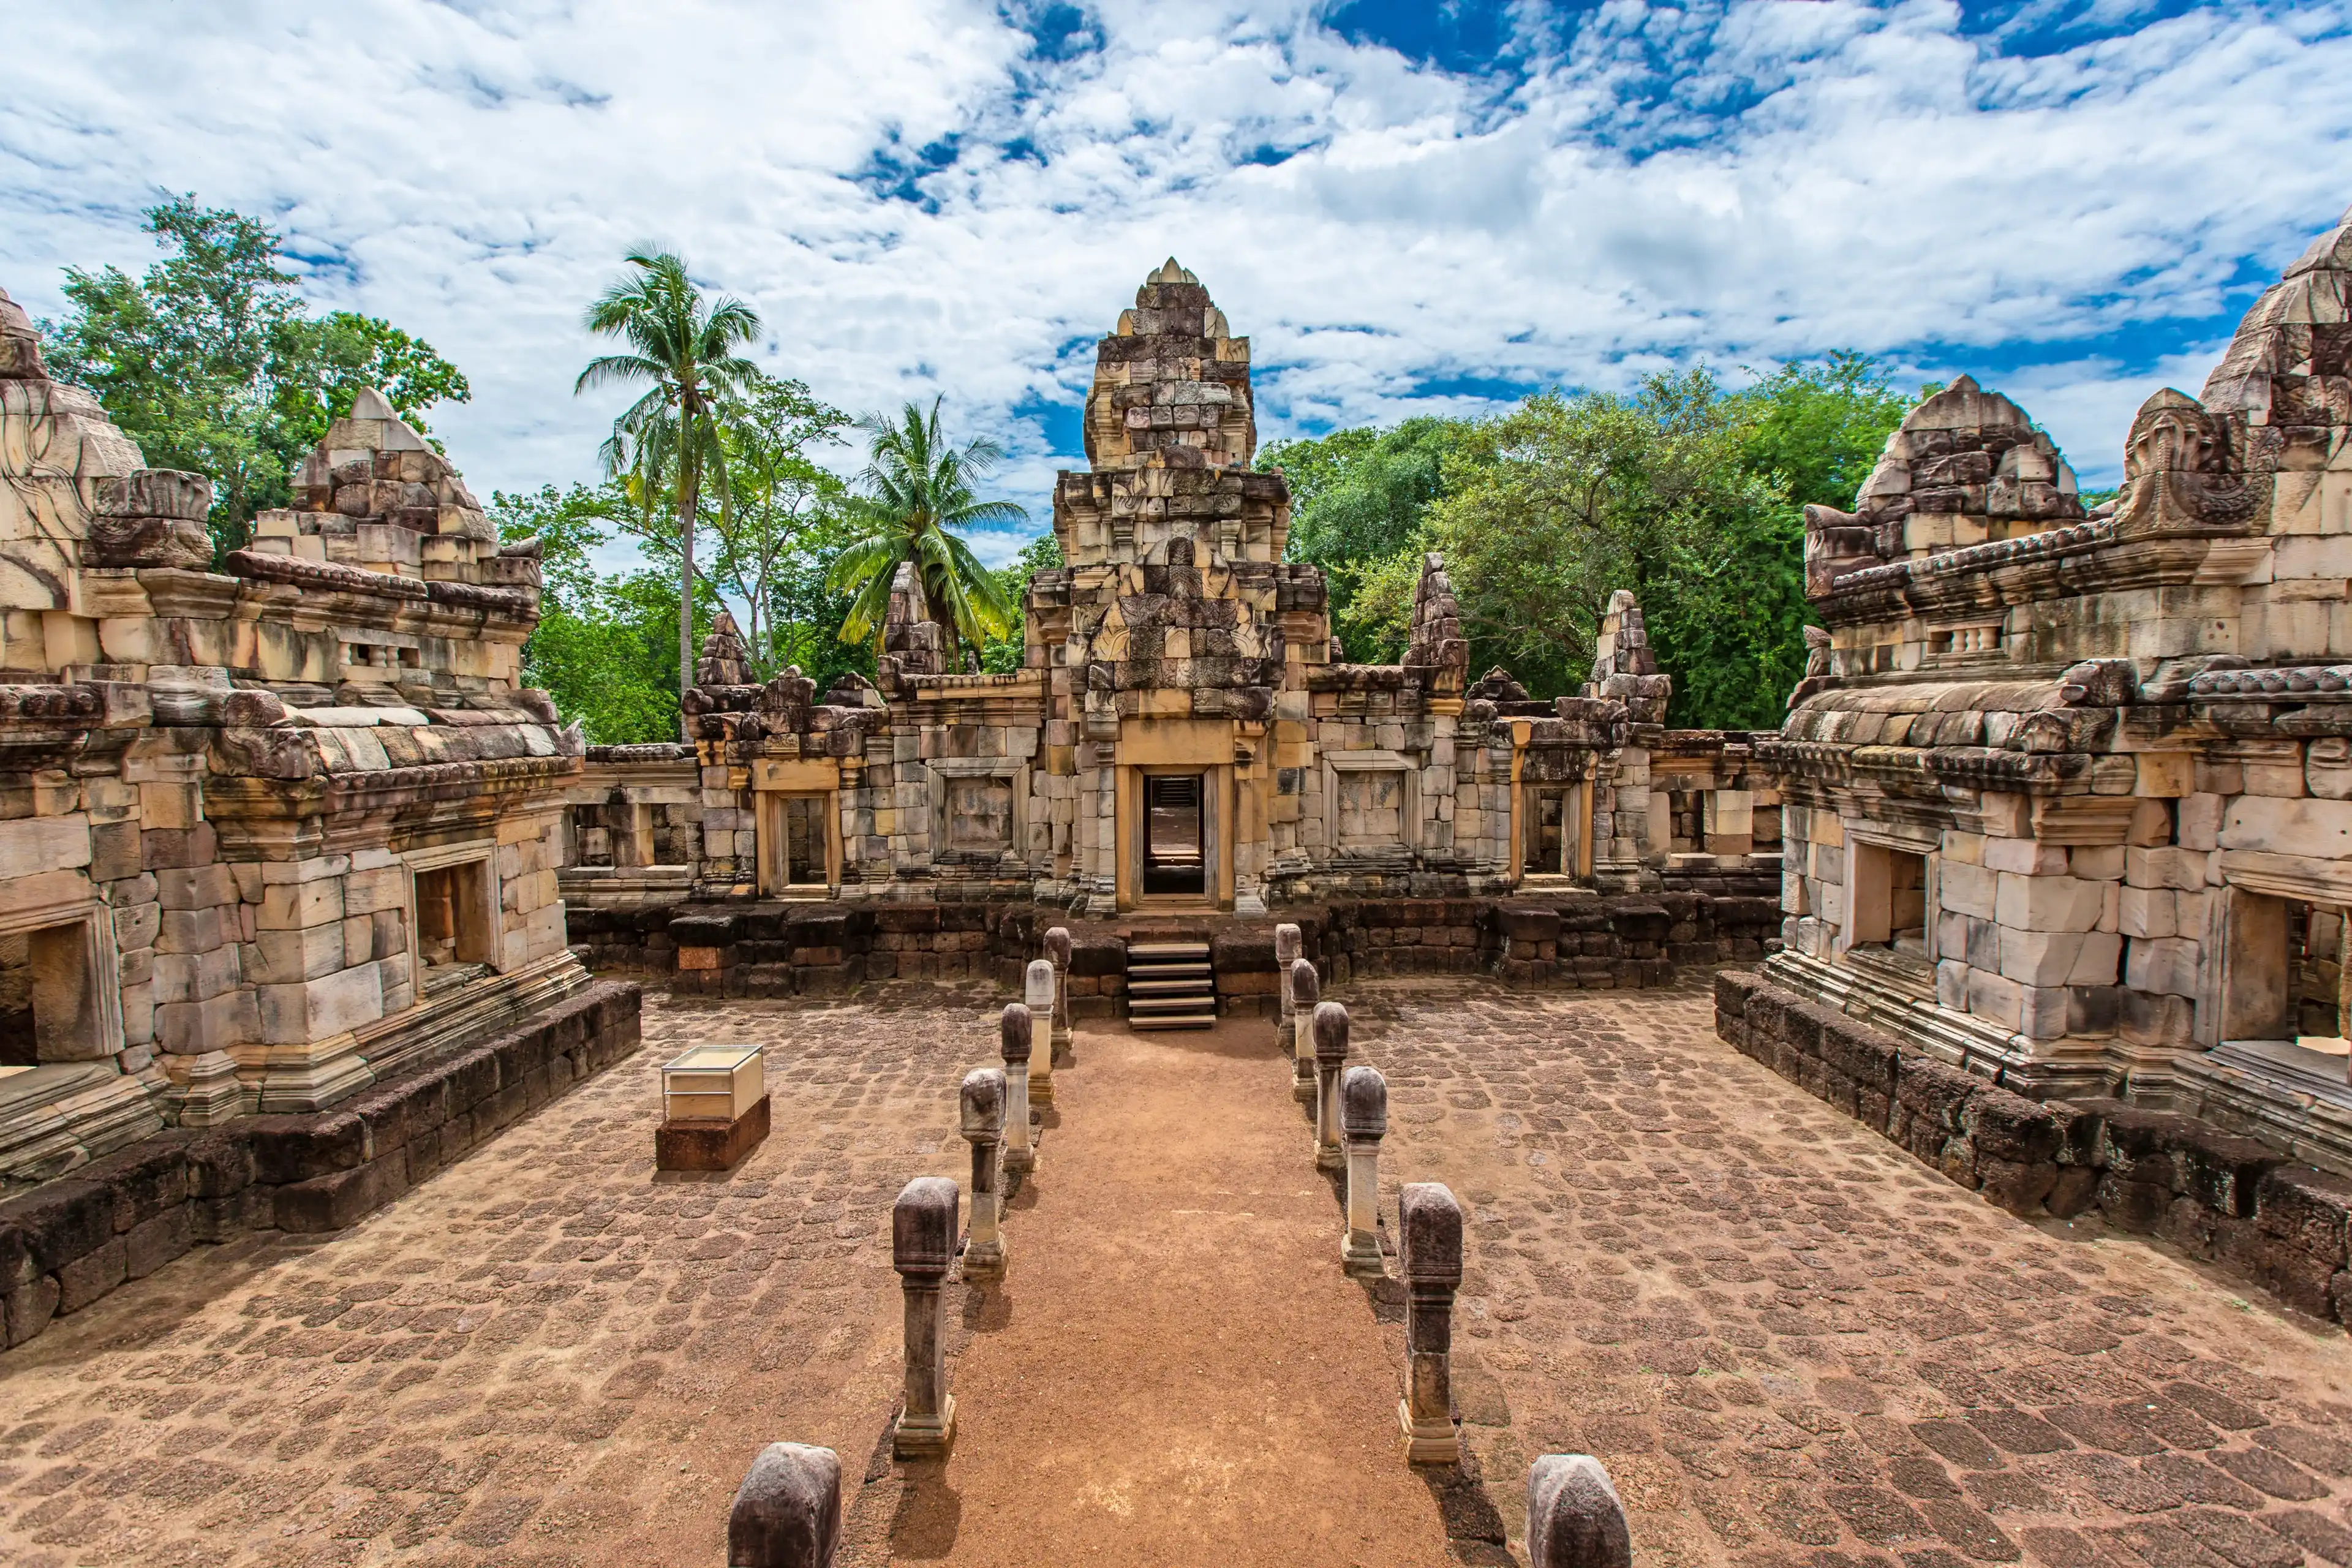 Beautiful landscape and ancient architecture of Prasat Sdok Kok Thom or Sdok Kok Thom Ancient Temple ,This is a famous Historical park in Sa Kaeo province ,Thailand